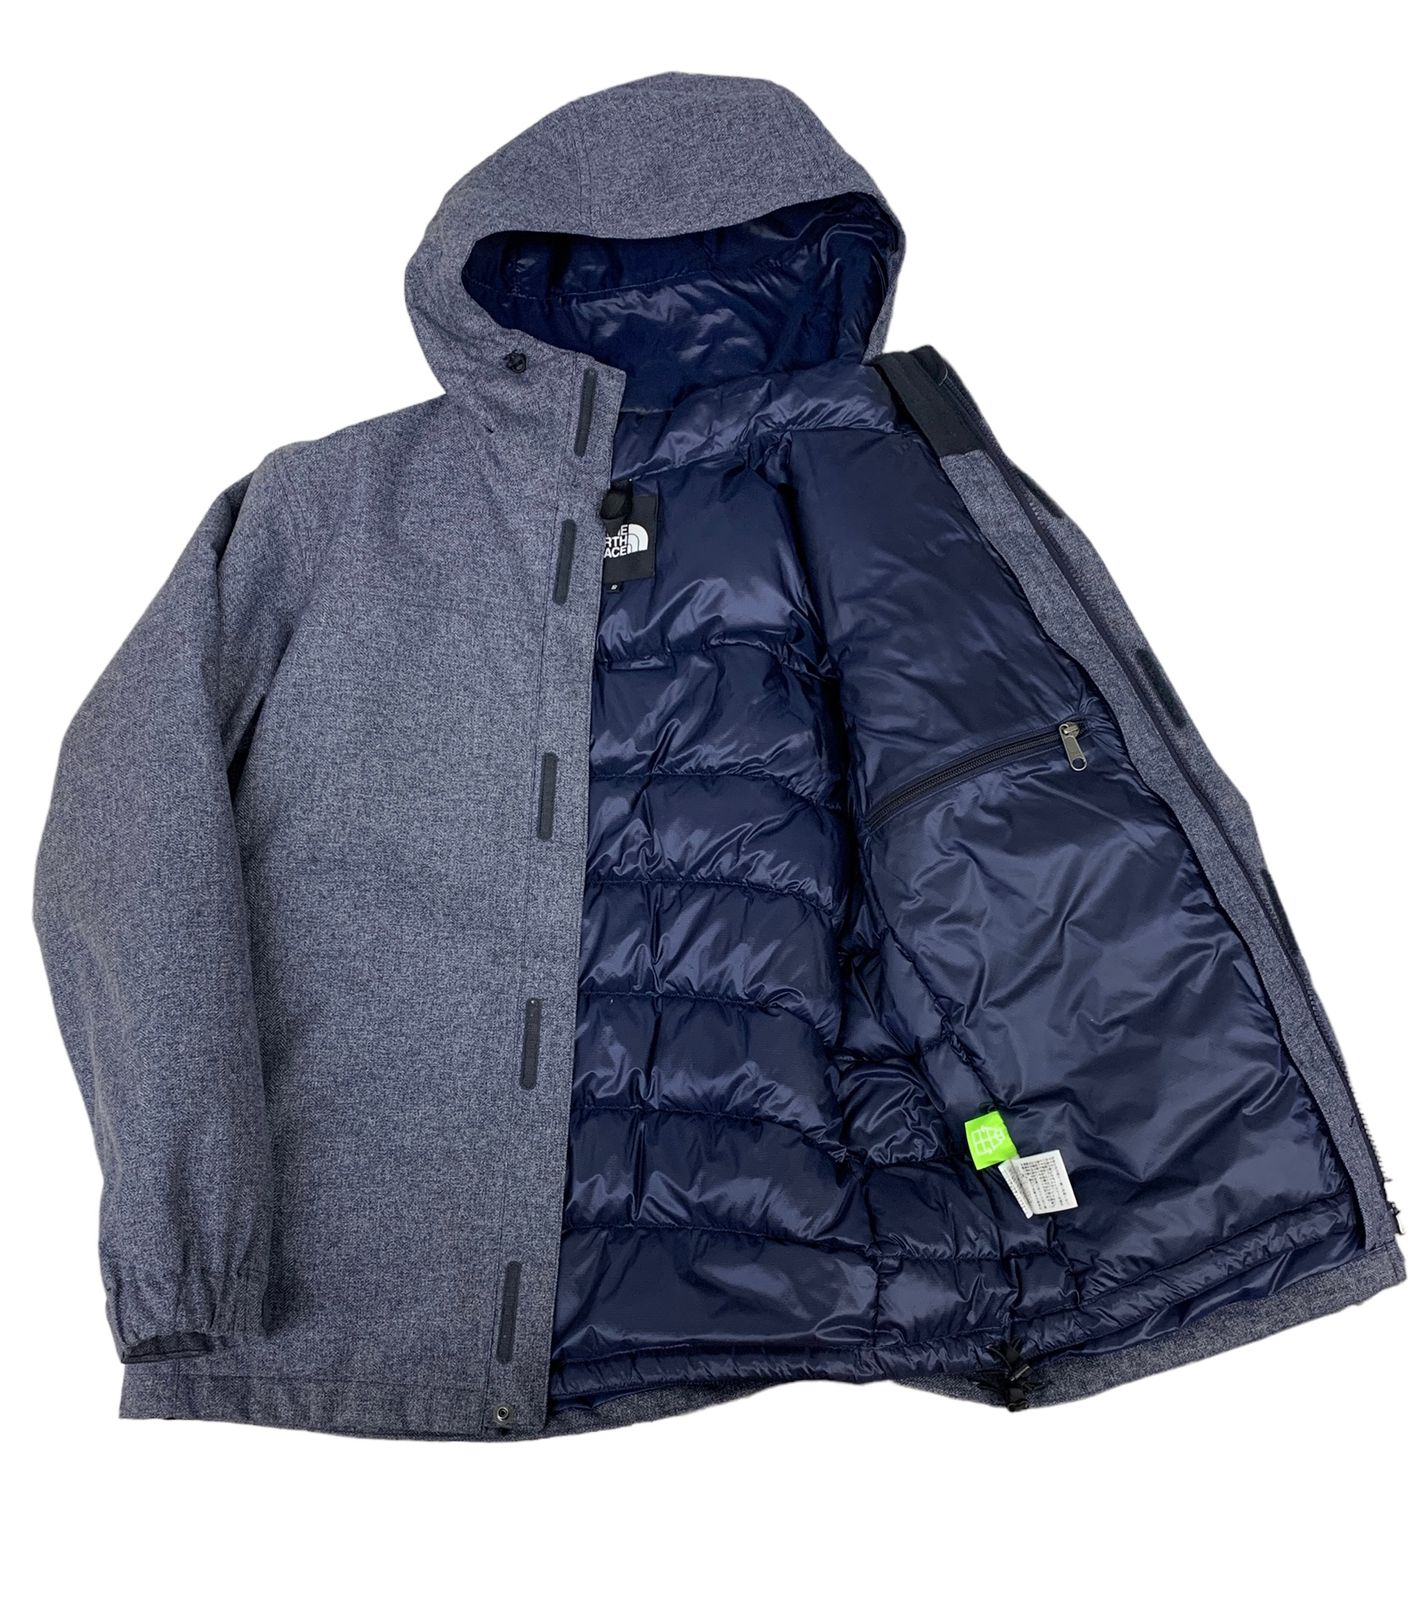 THE NORTH FACE (ザノースフェイス) Novelty Zeus Triclimate Jacket 